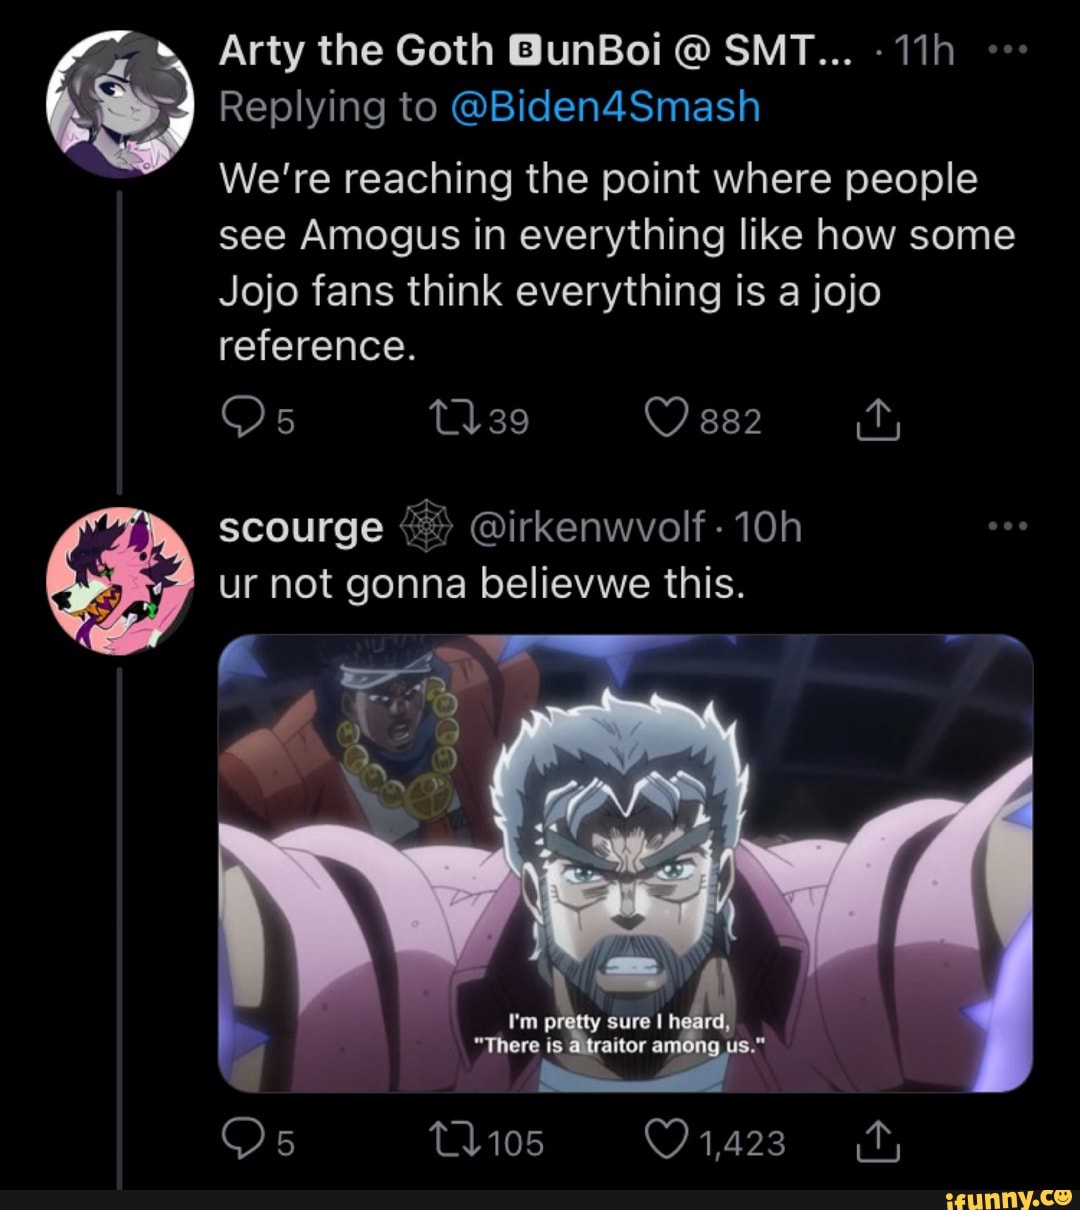 Everything is a JoJo reference - iFunny